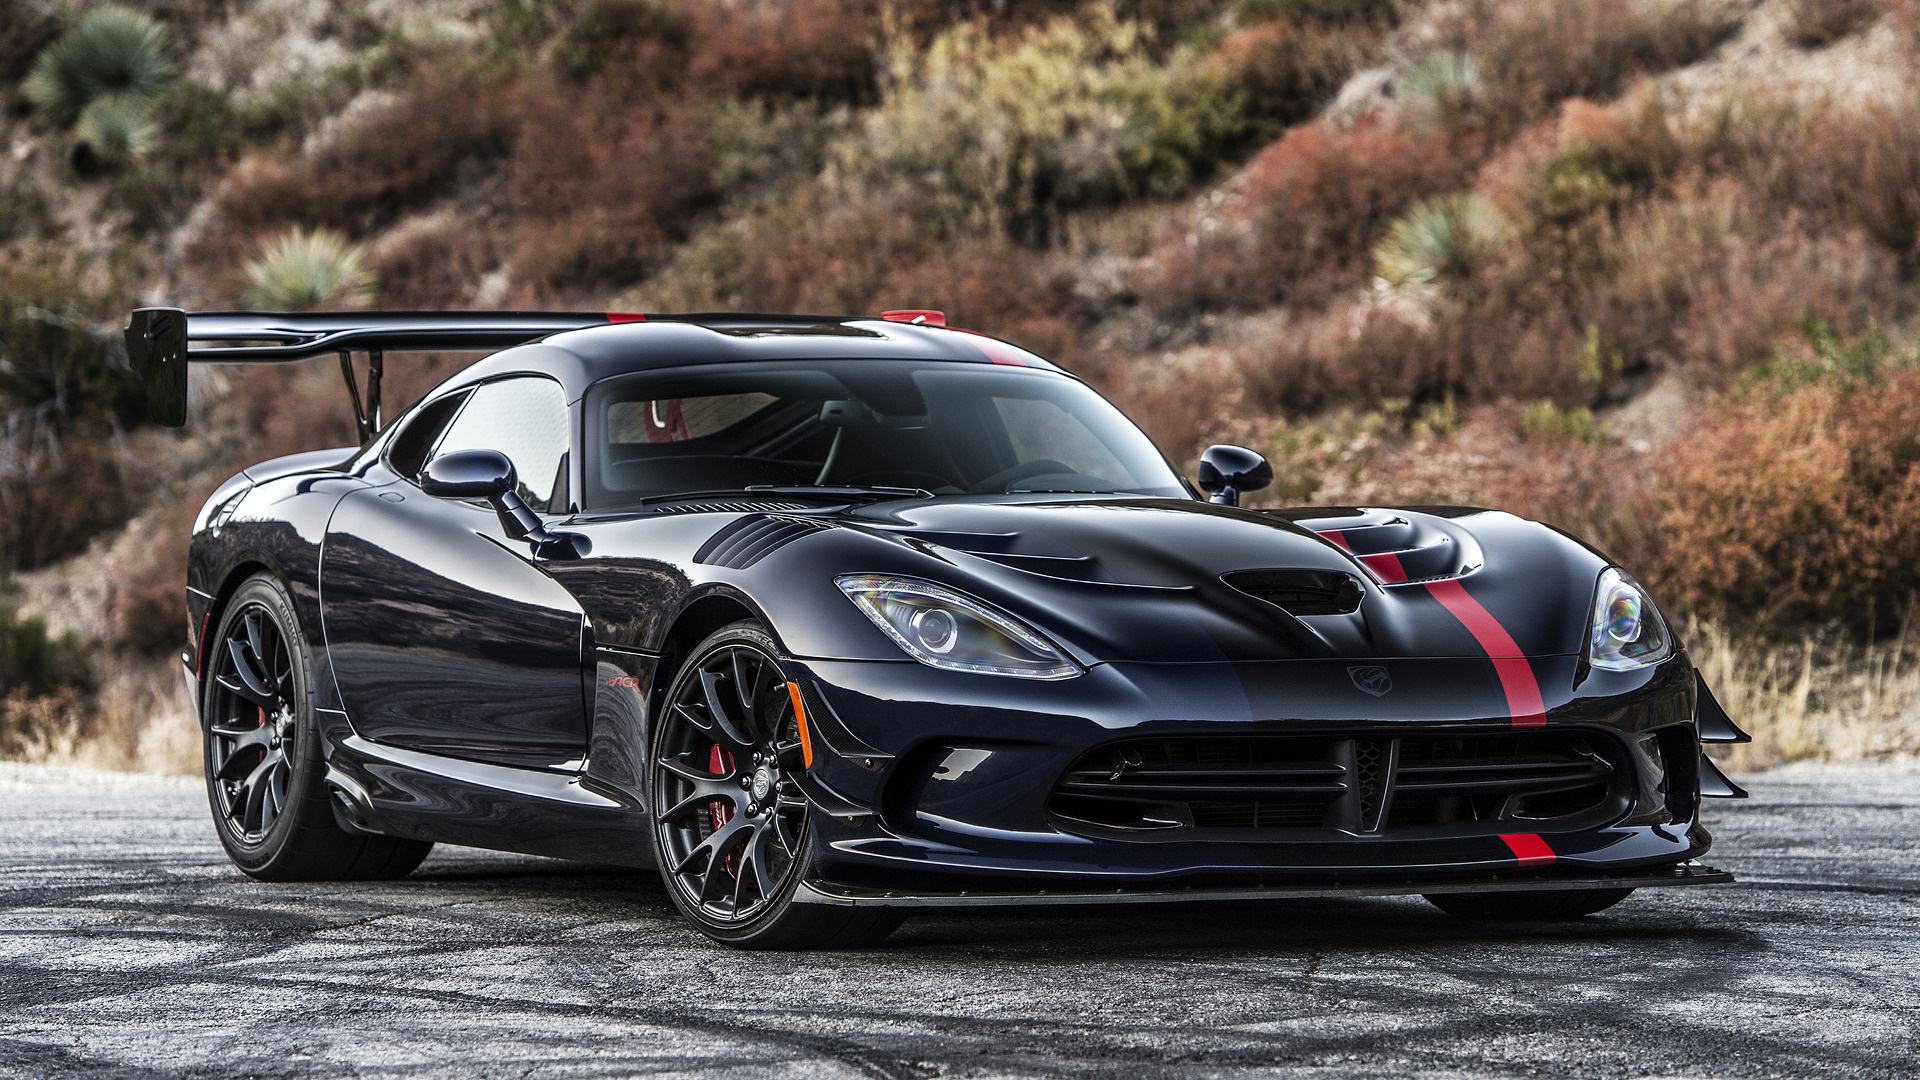 Dodge Viper, Limited production, Legacy ended, Collector's item, 1920x1080 Full HD Desktop